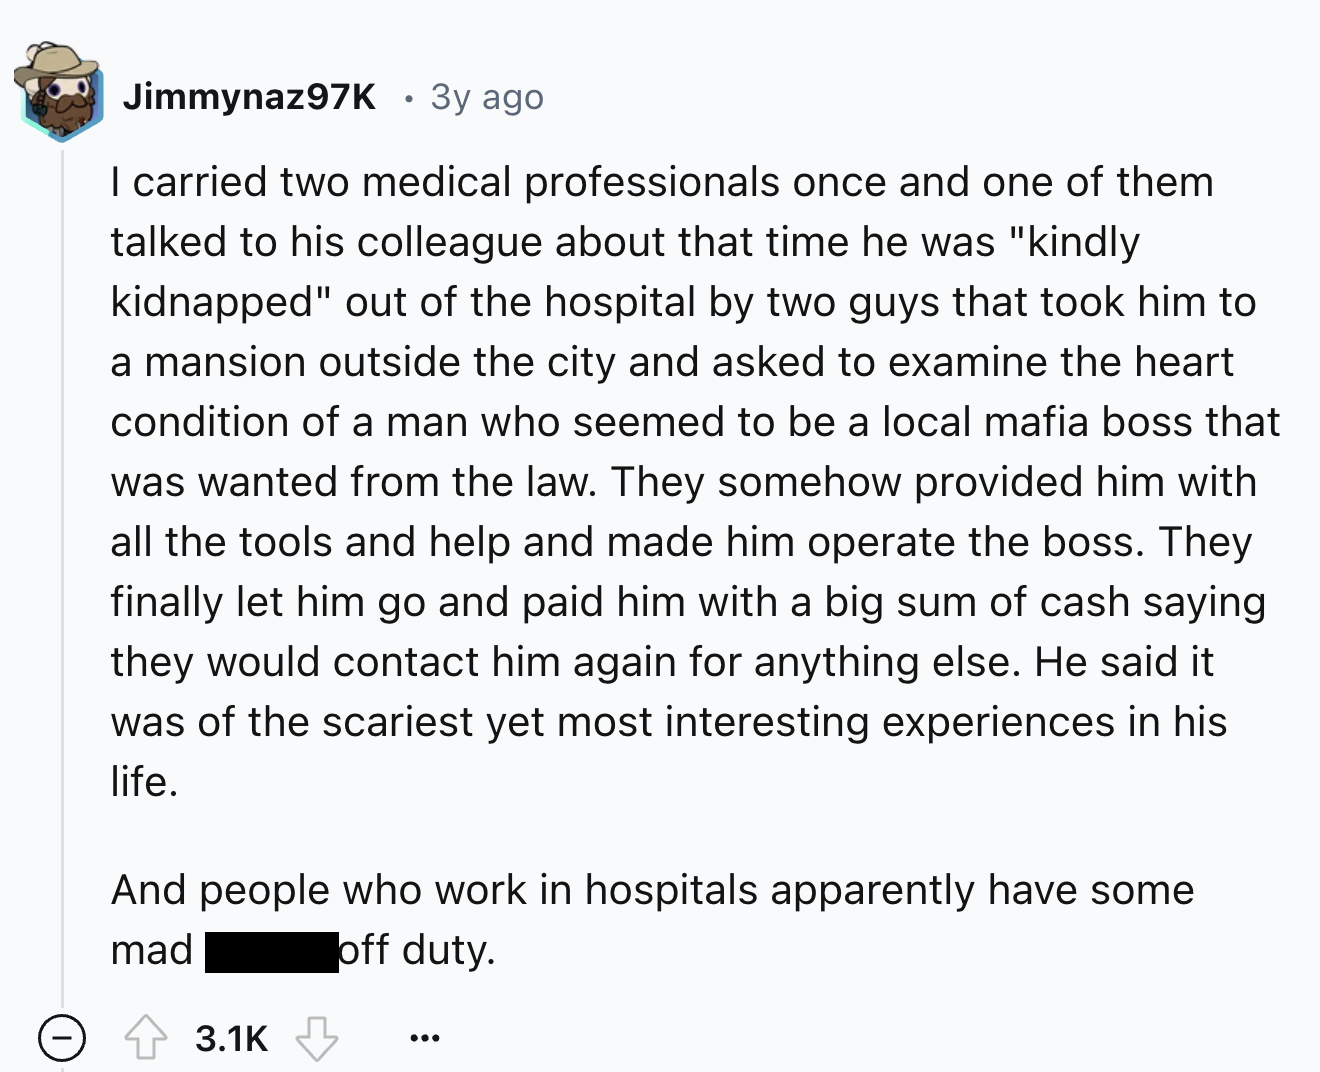 screenshot - Jimmynaz97K 3y ago I carried two medical professionals once and one of them talked to his colleague about that time he was "kindly kidnapped" out of the hospital by two guys that took him to a mansion outside the city and asked to examine the